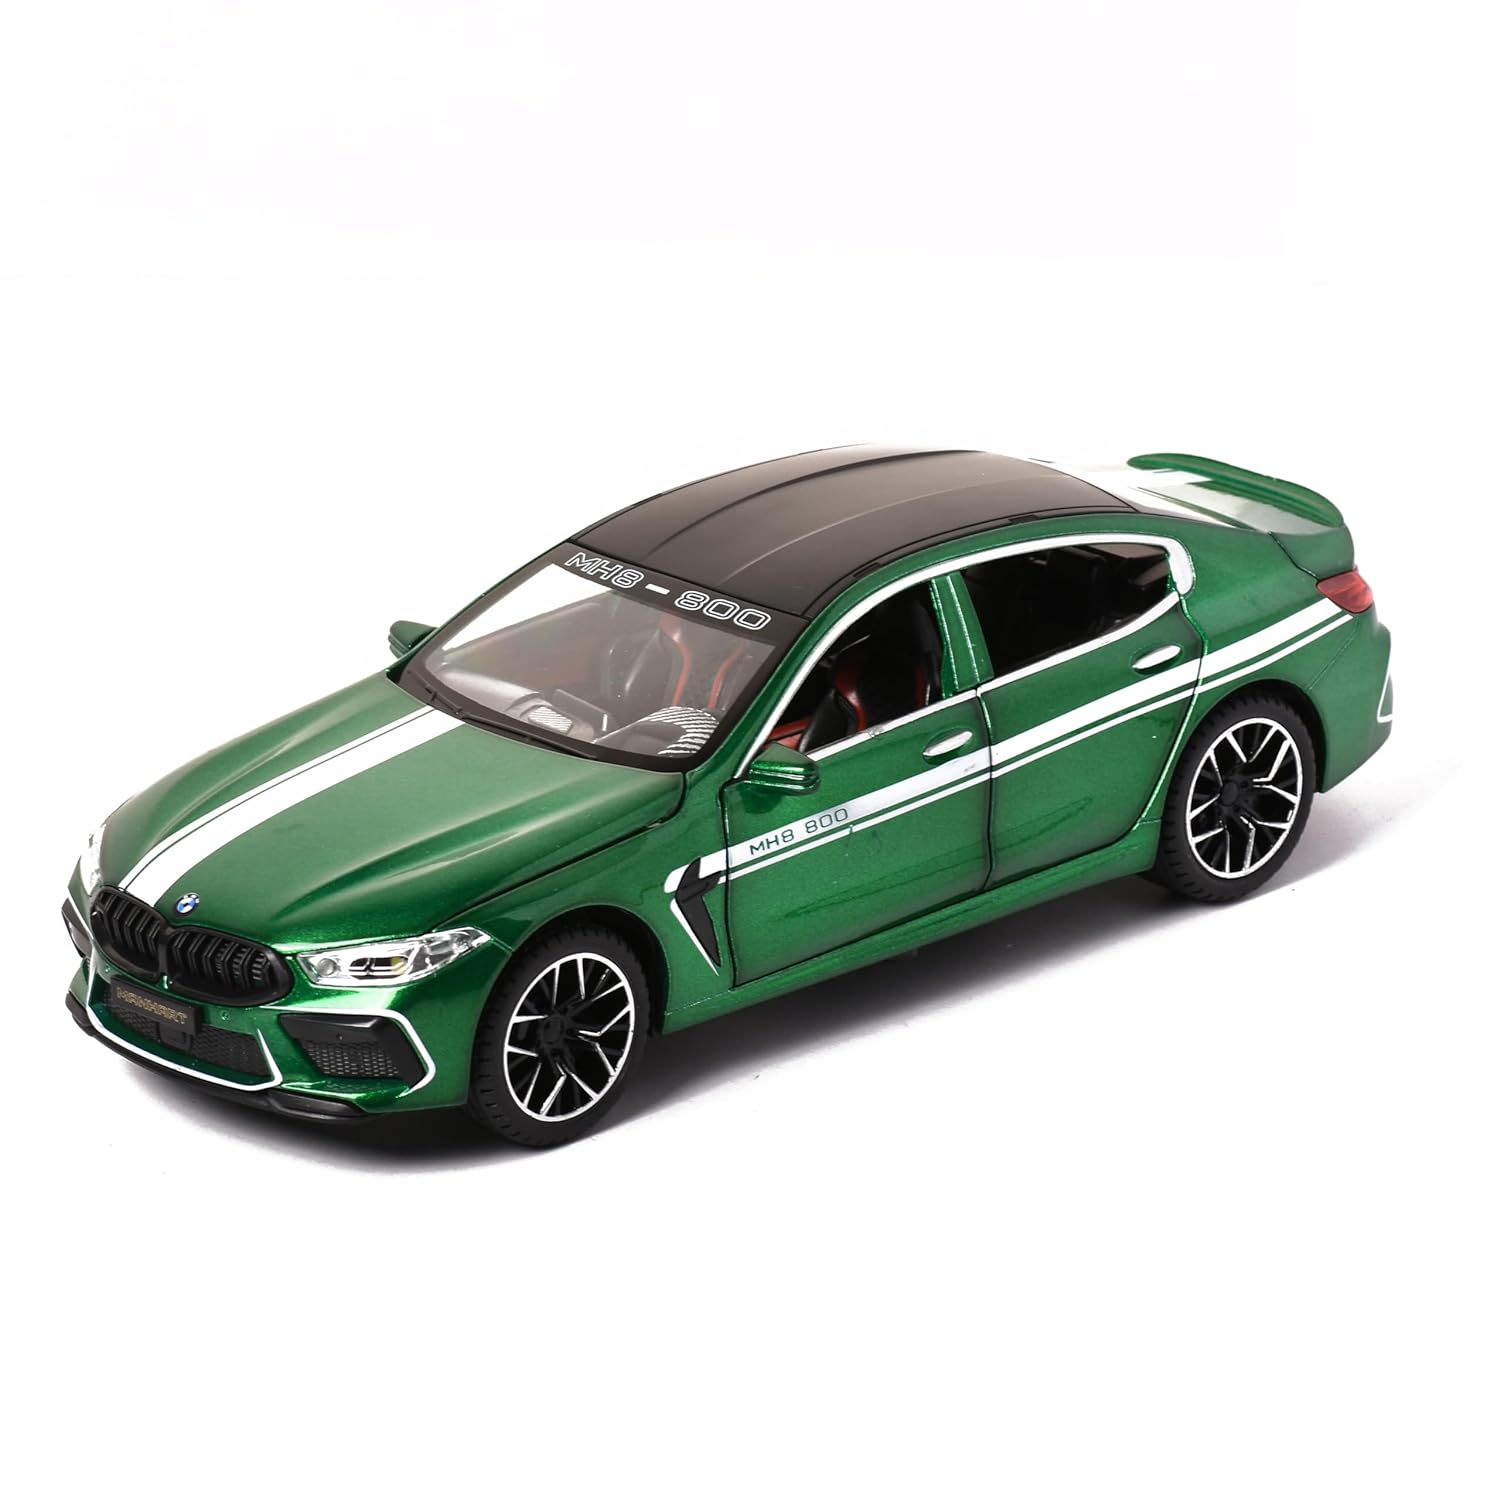 Braintastic Model Diecast Car Toy Vehicle Pull Back Friction Car with Openable Doors Light & Music Toys for Kids Age 3+ Years (BMW Green)